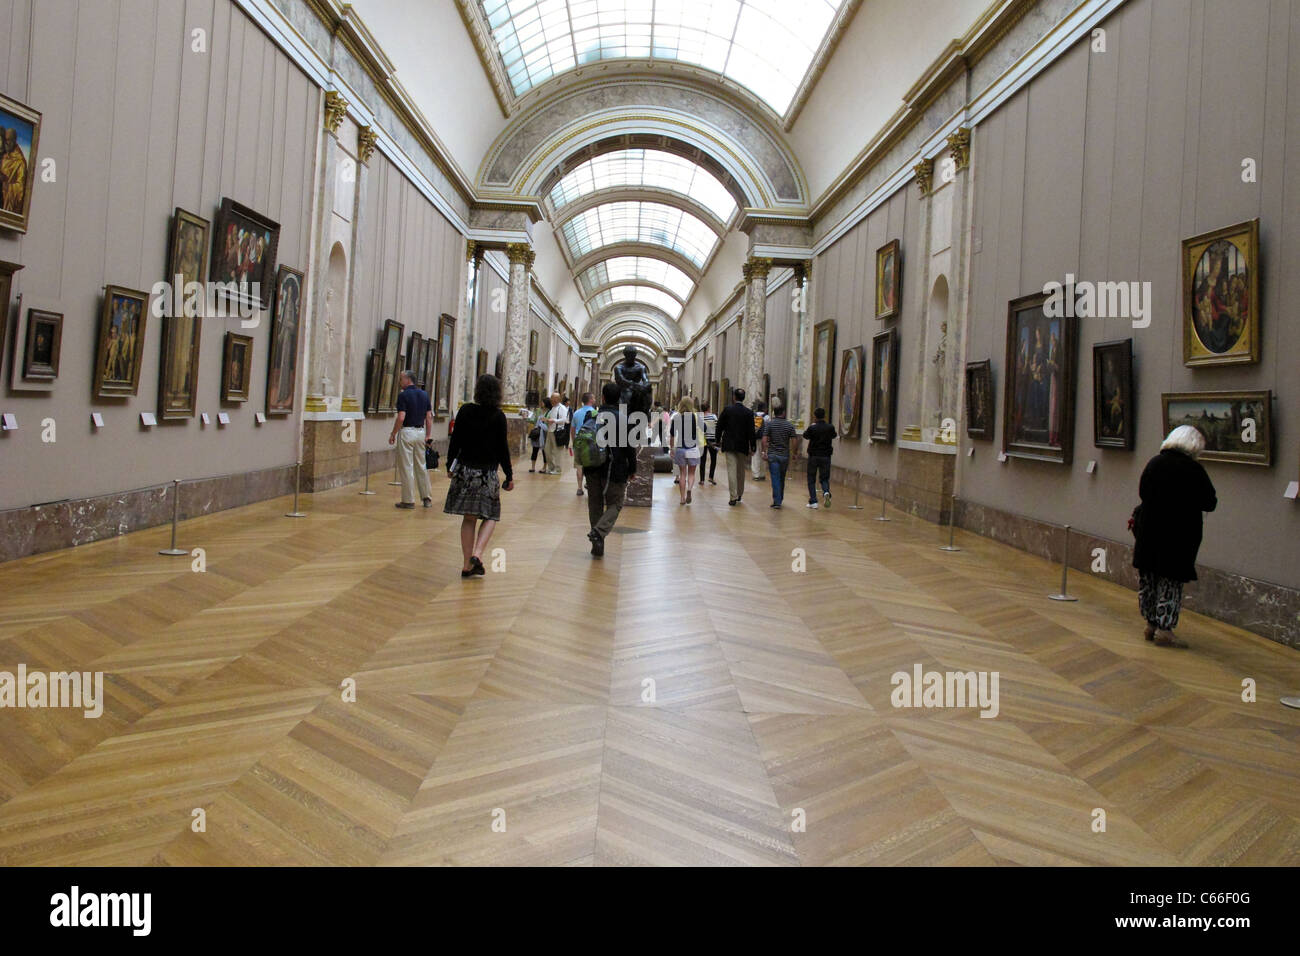 Visitors admiring works of art in the Louvre Museum in Paris France Stock Photo